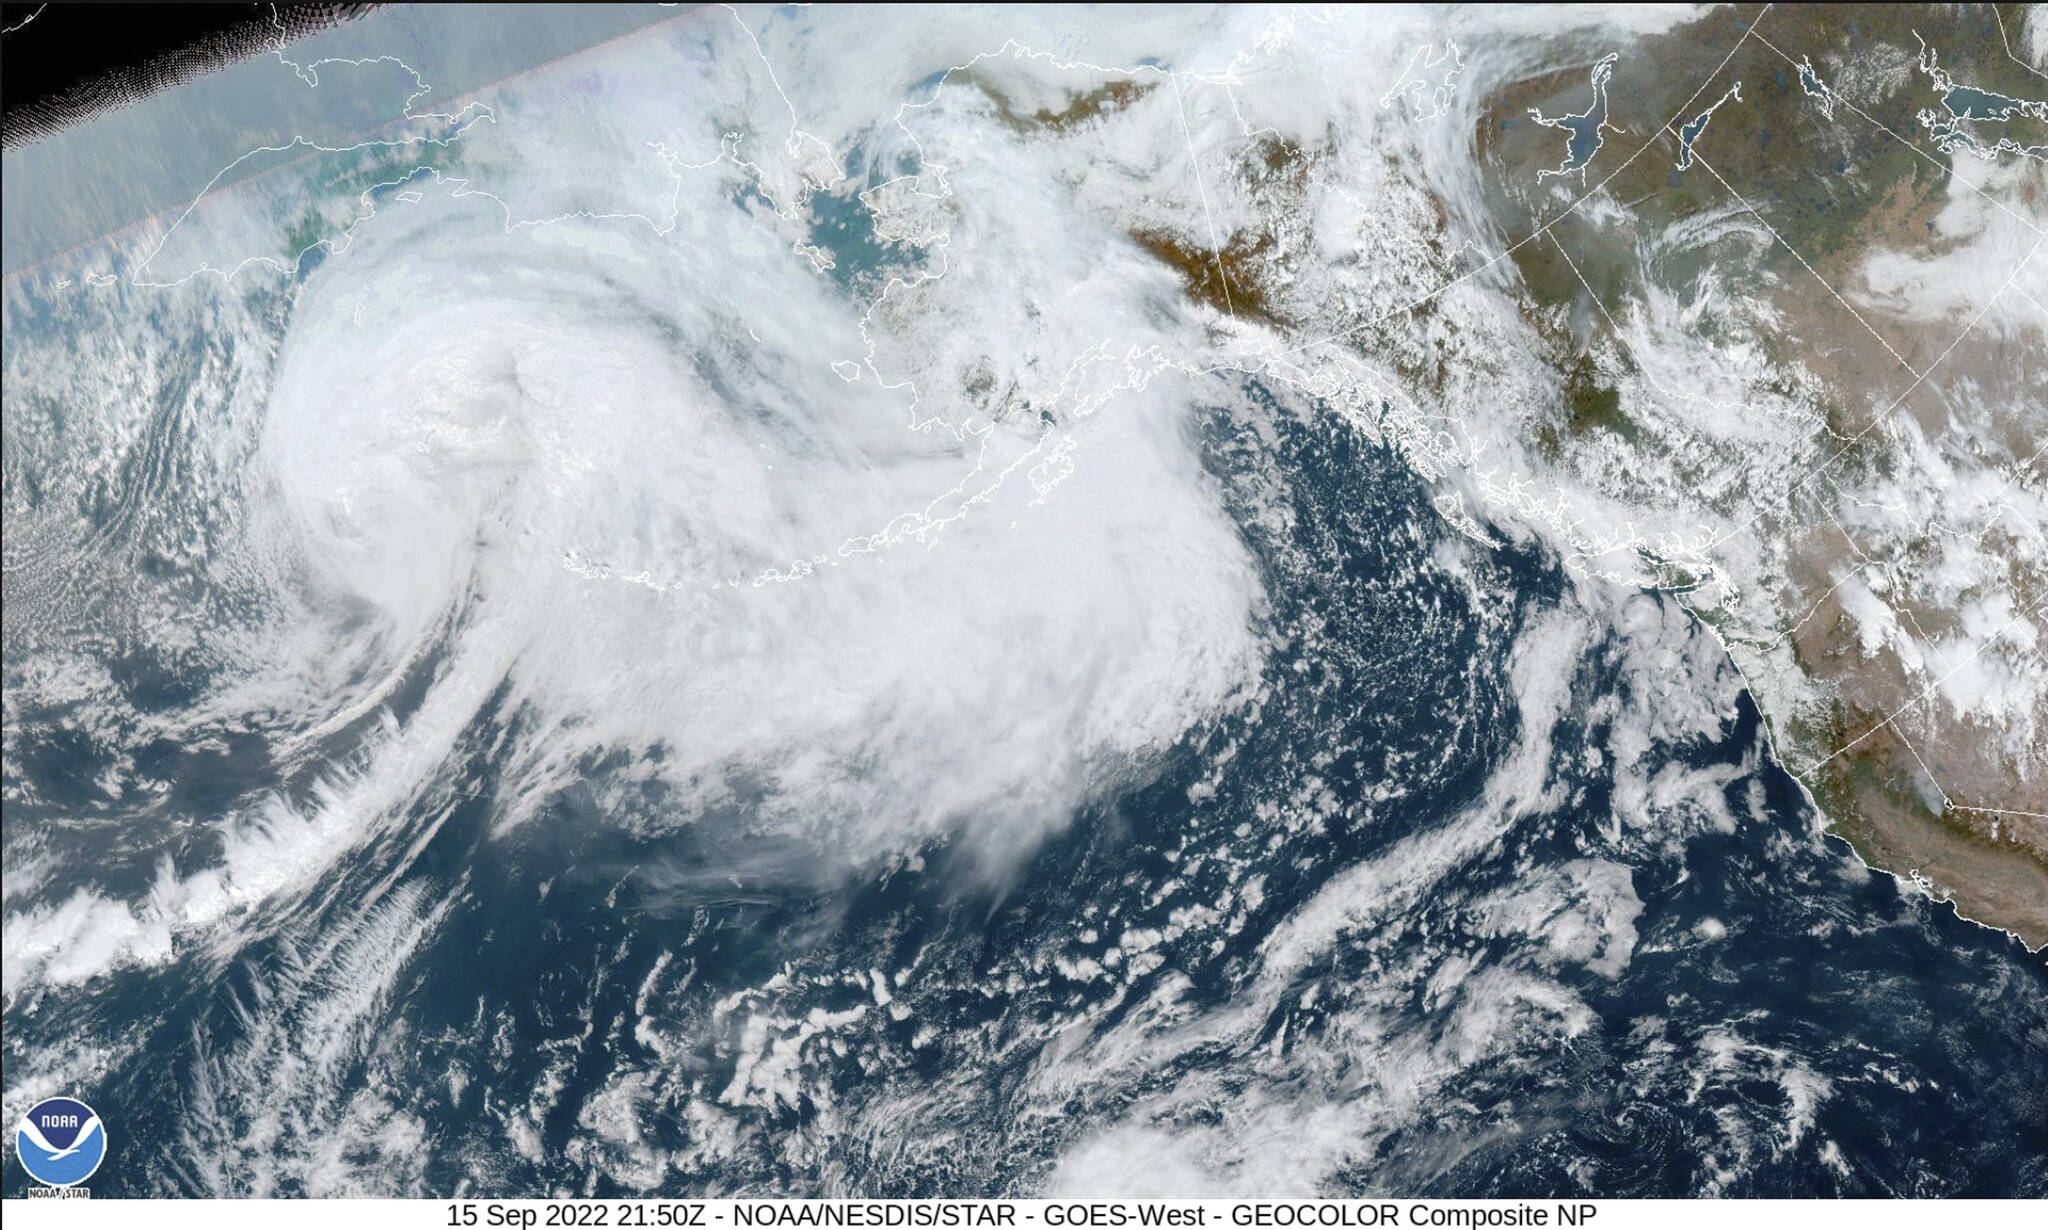 This image provided by the National Hurricane Center and Central Pacific Hurricane Center/National Oceanic and Atmospheric Administration shows a satellite view over Alaska, Thursday, Sept. 15, 2022. A vast swath of western Alaska could see flooding and high winds as the remnants of Typhoon Merbok move toward the Bering Sea region. The National Weather Service had in place coastal flood warnings, beginning Friday, spanning from parts of the Yukon Delta in southwest Alaska up to St. Lawrence Island in the Bering Sea and to the Bering Strait coast. (NOAA via AP)